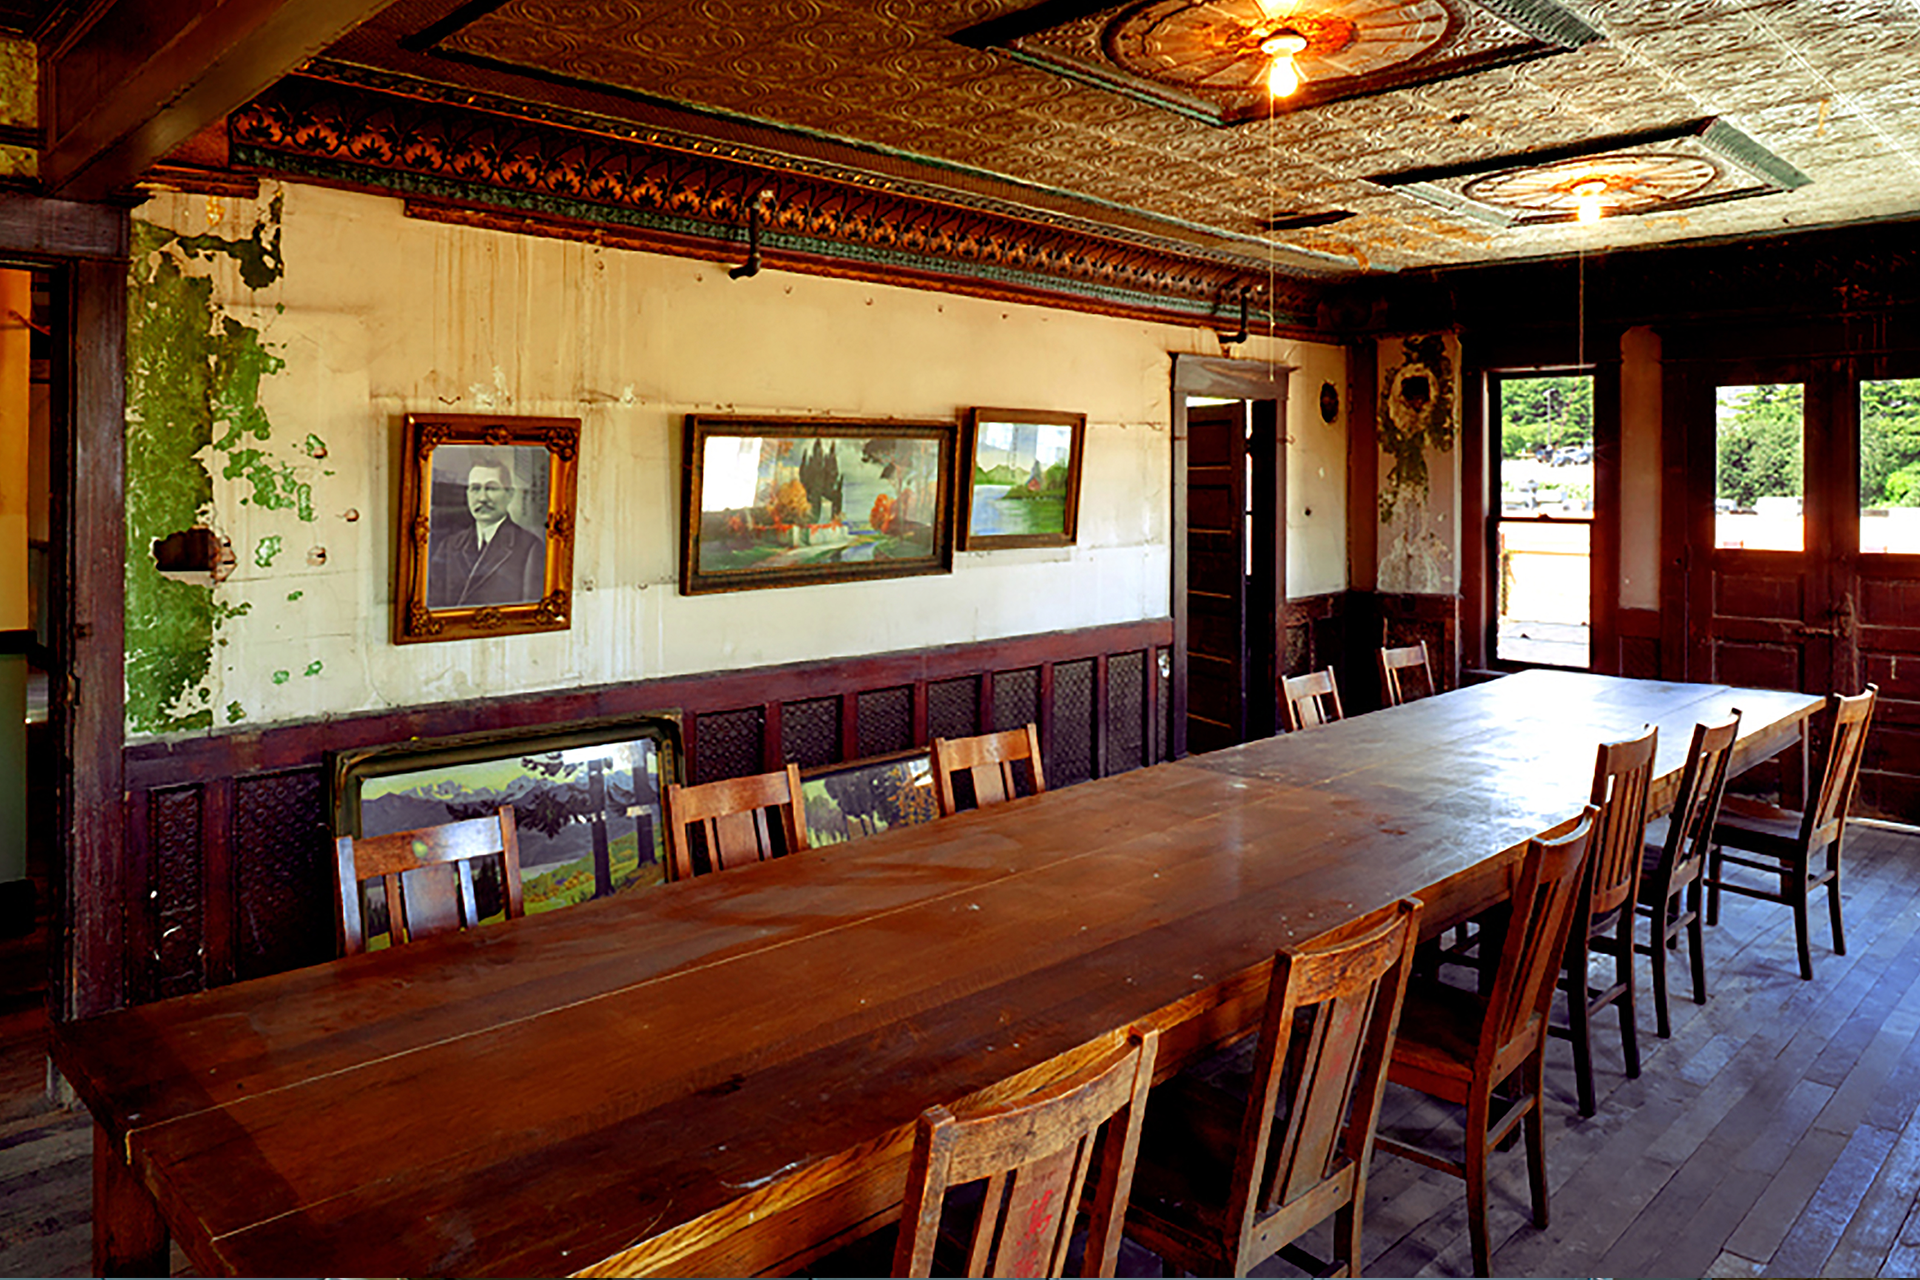 An exhibit at the Wing Luke Museum features framed photographs on the walls, a long wood table, and an ornate ceiling.